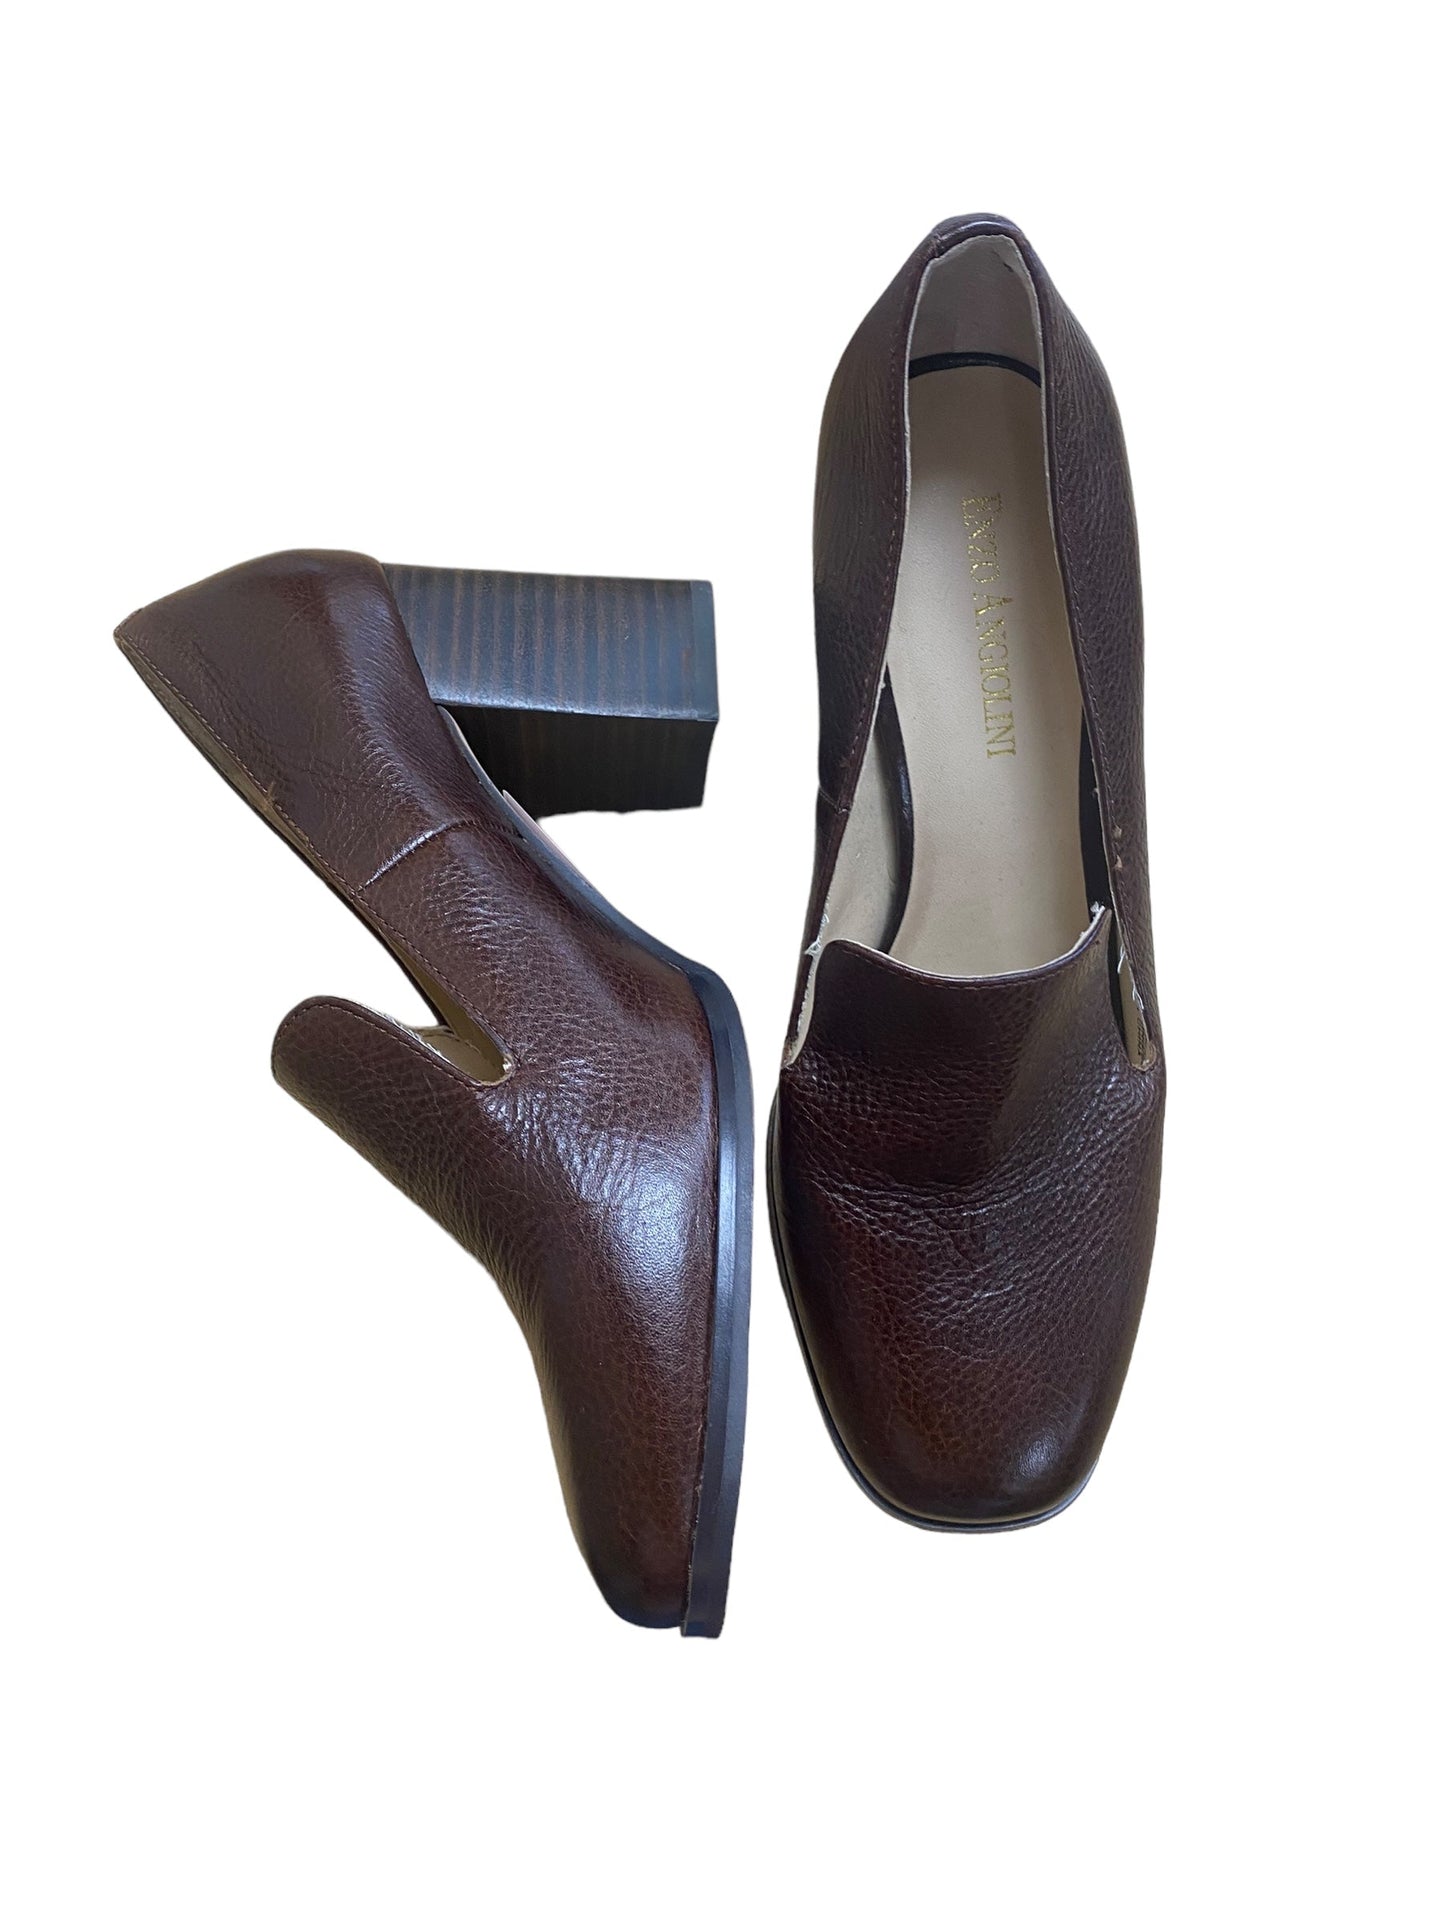 Brown Shoes Heels Block Enzo Angiolini, Size 6.5